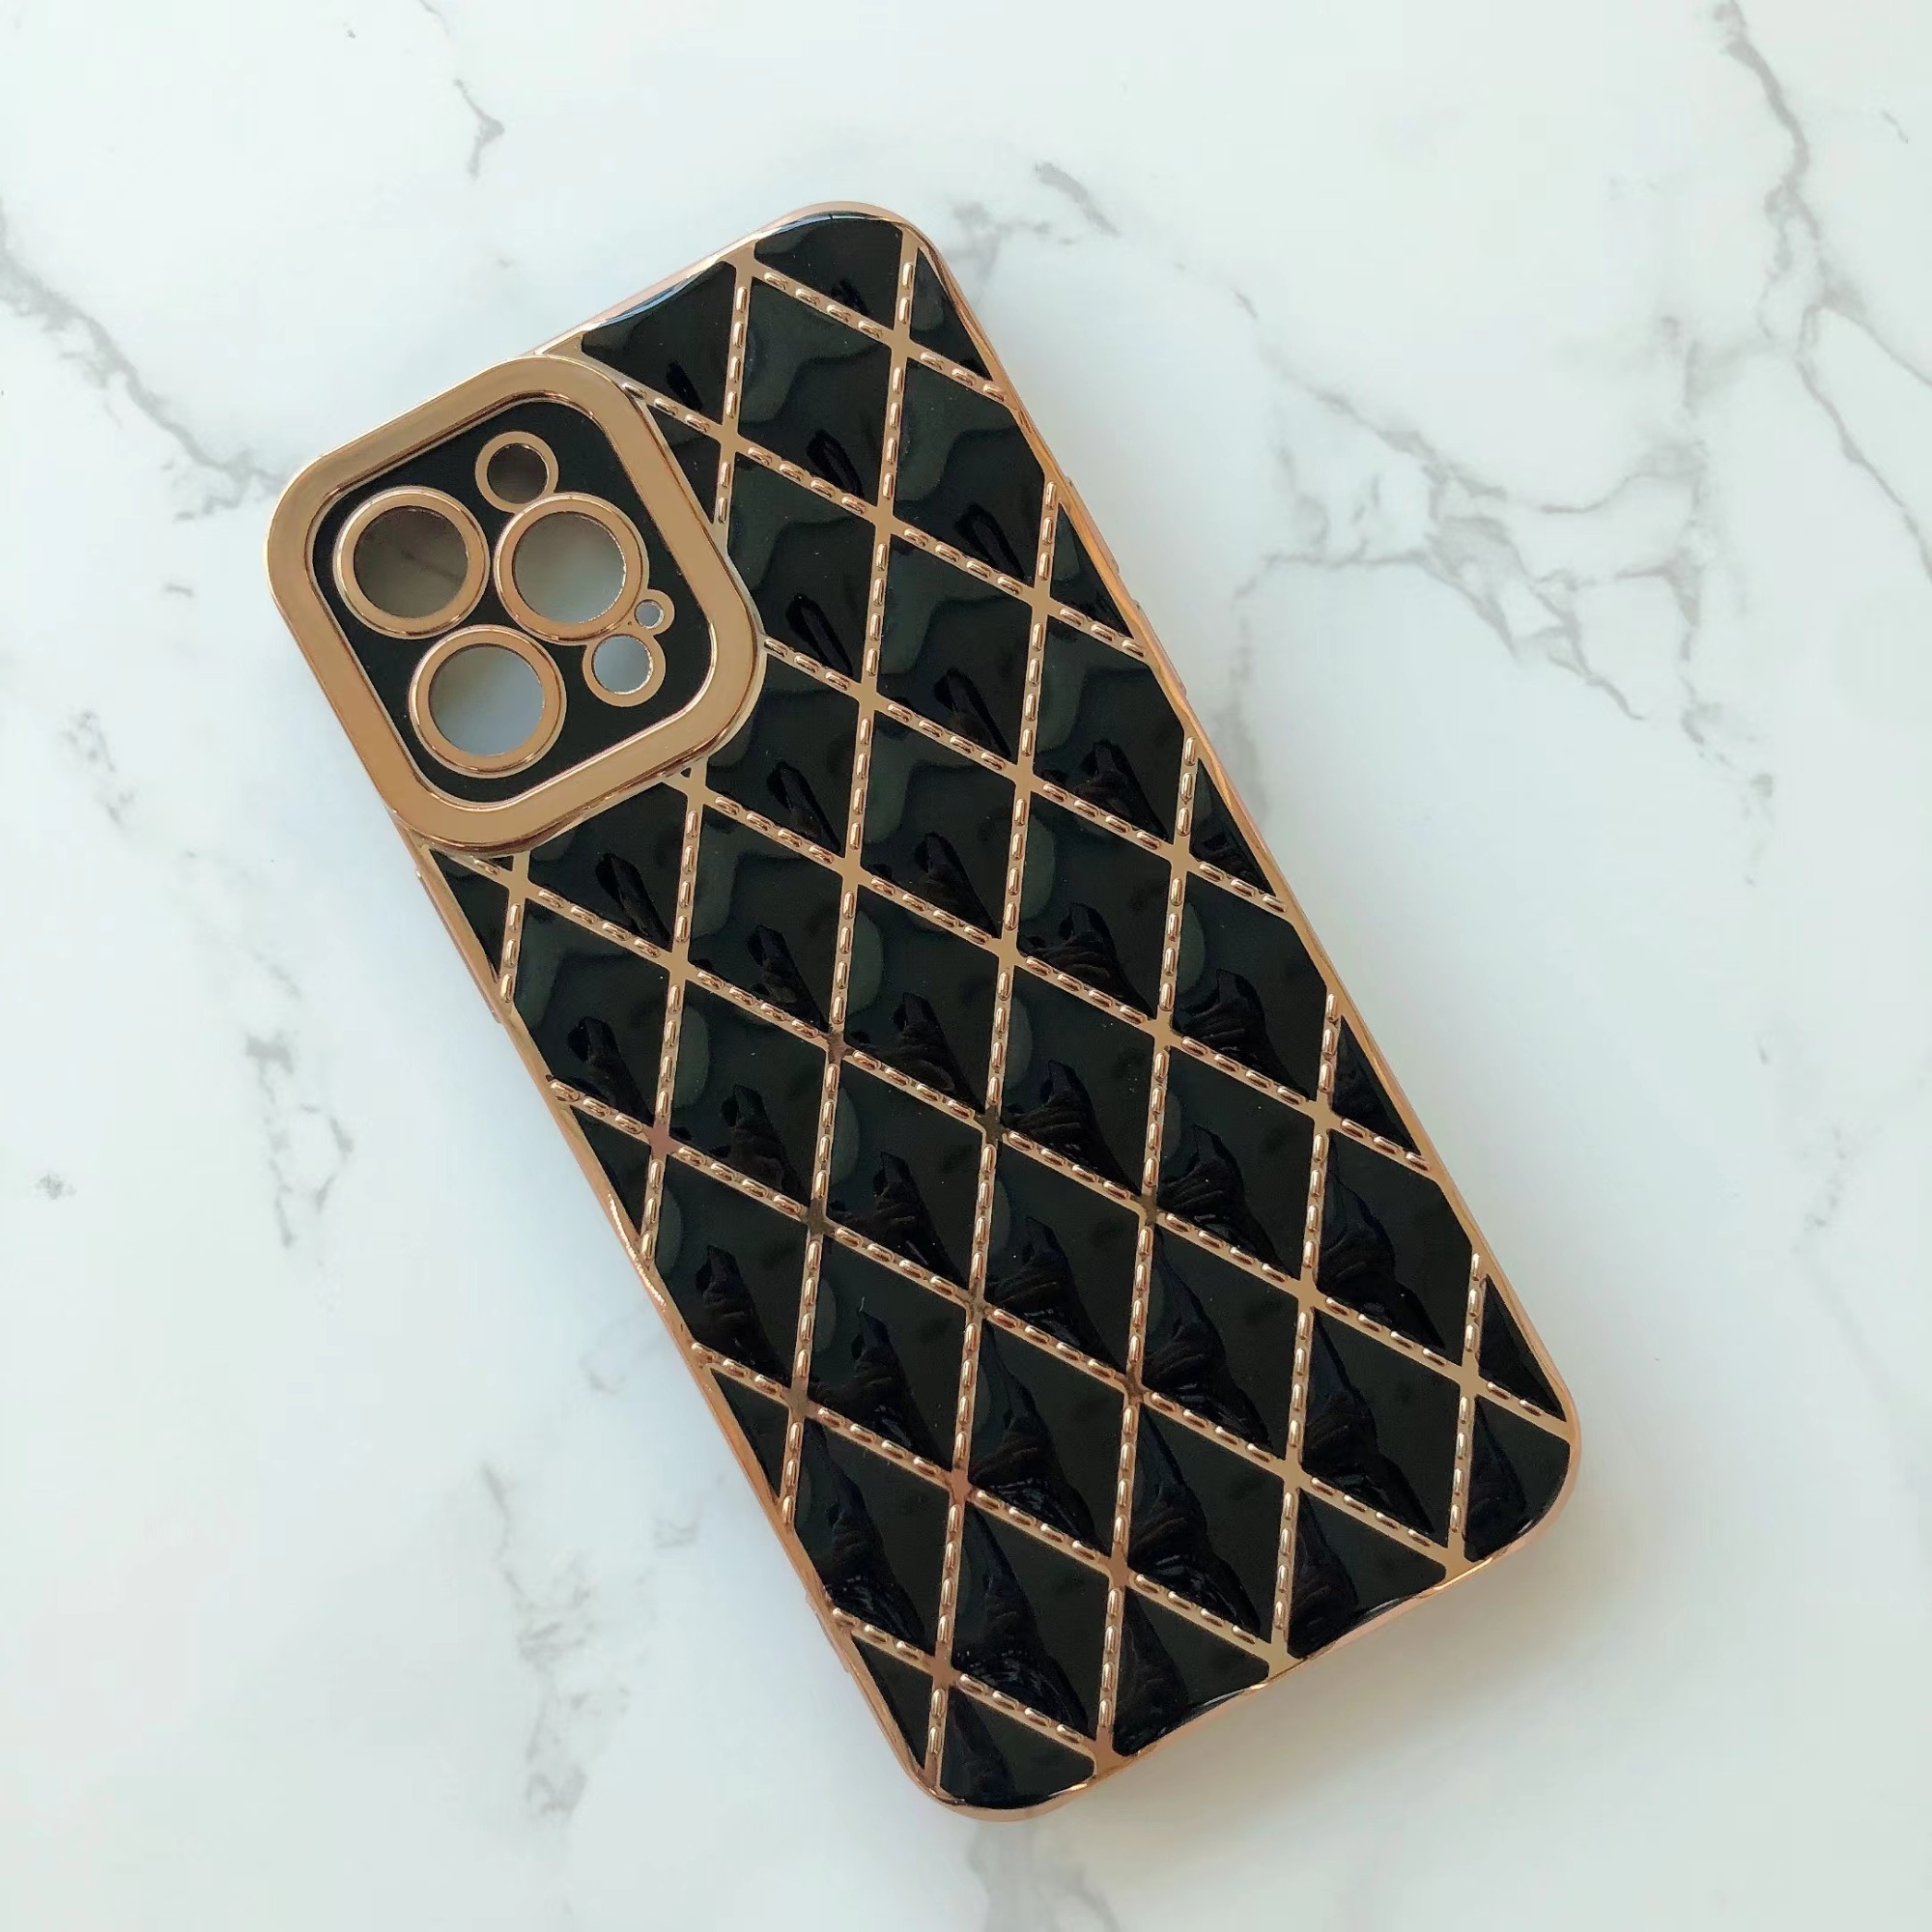 Luxury fashion Electroplated diamond phone case for SAM A50S/A50/A30S